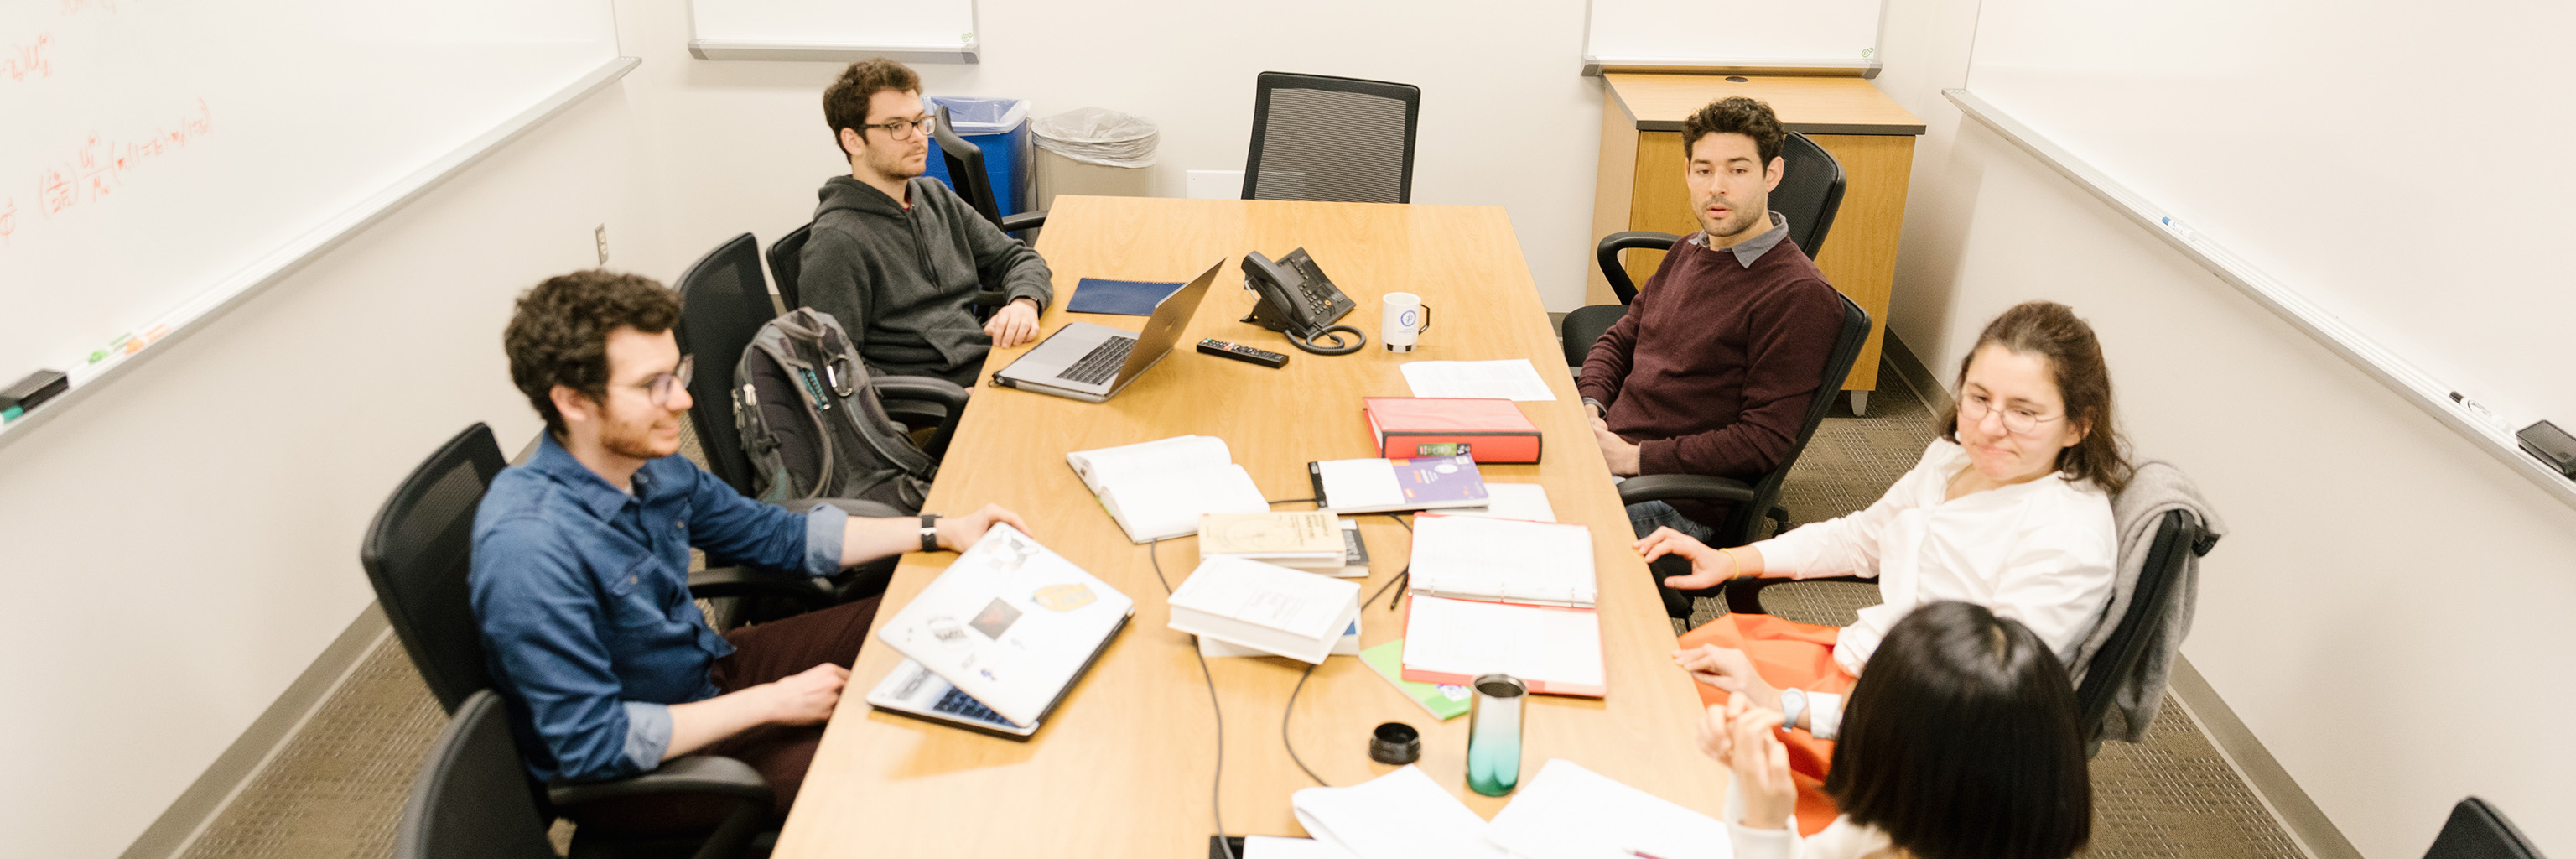 Graduate students convened around a conference table